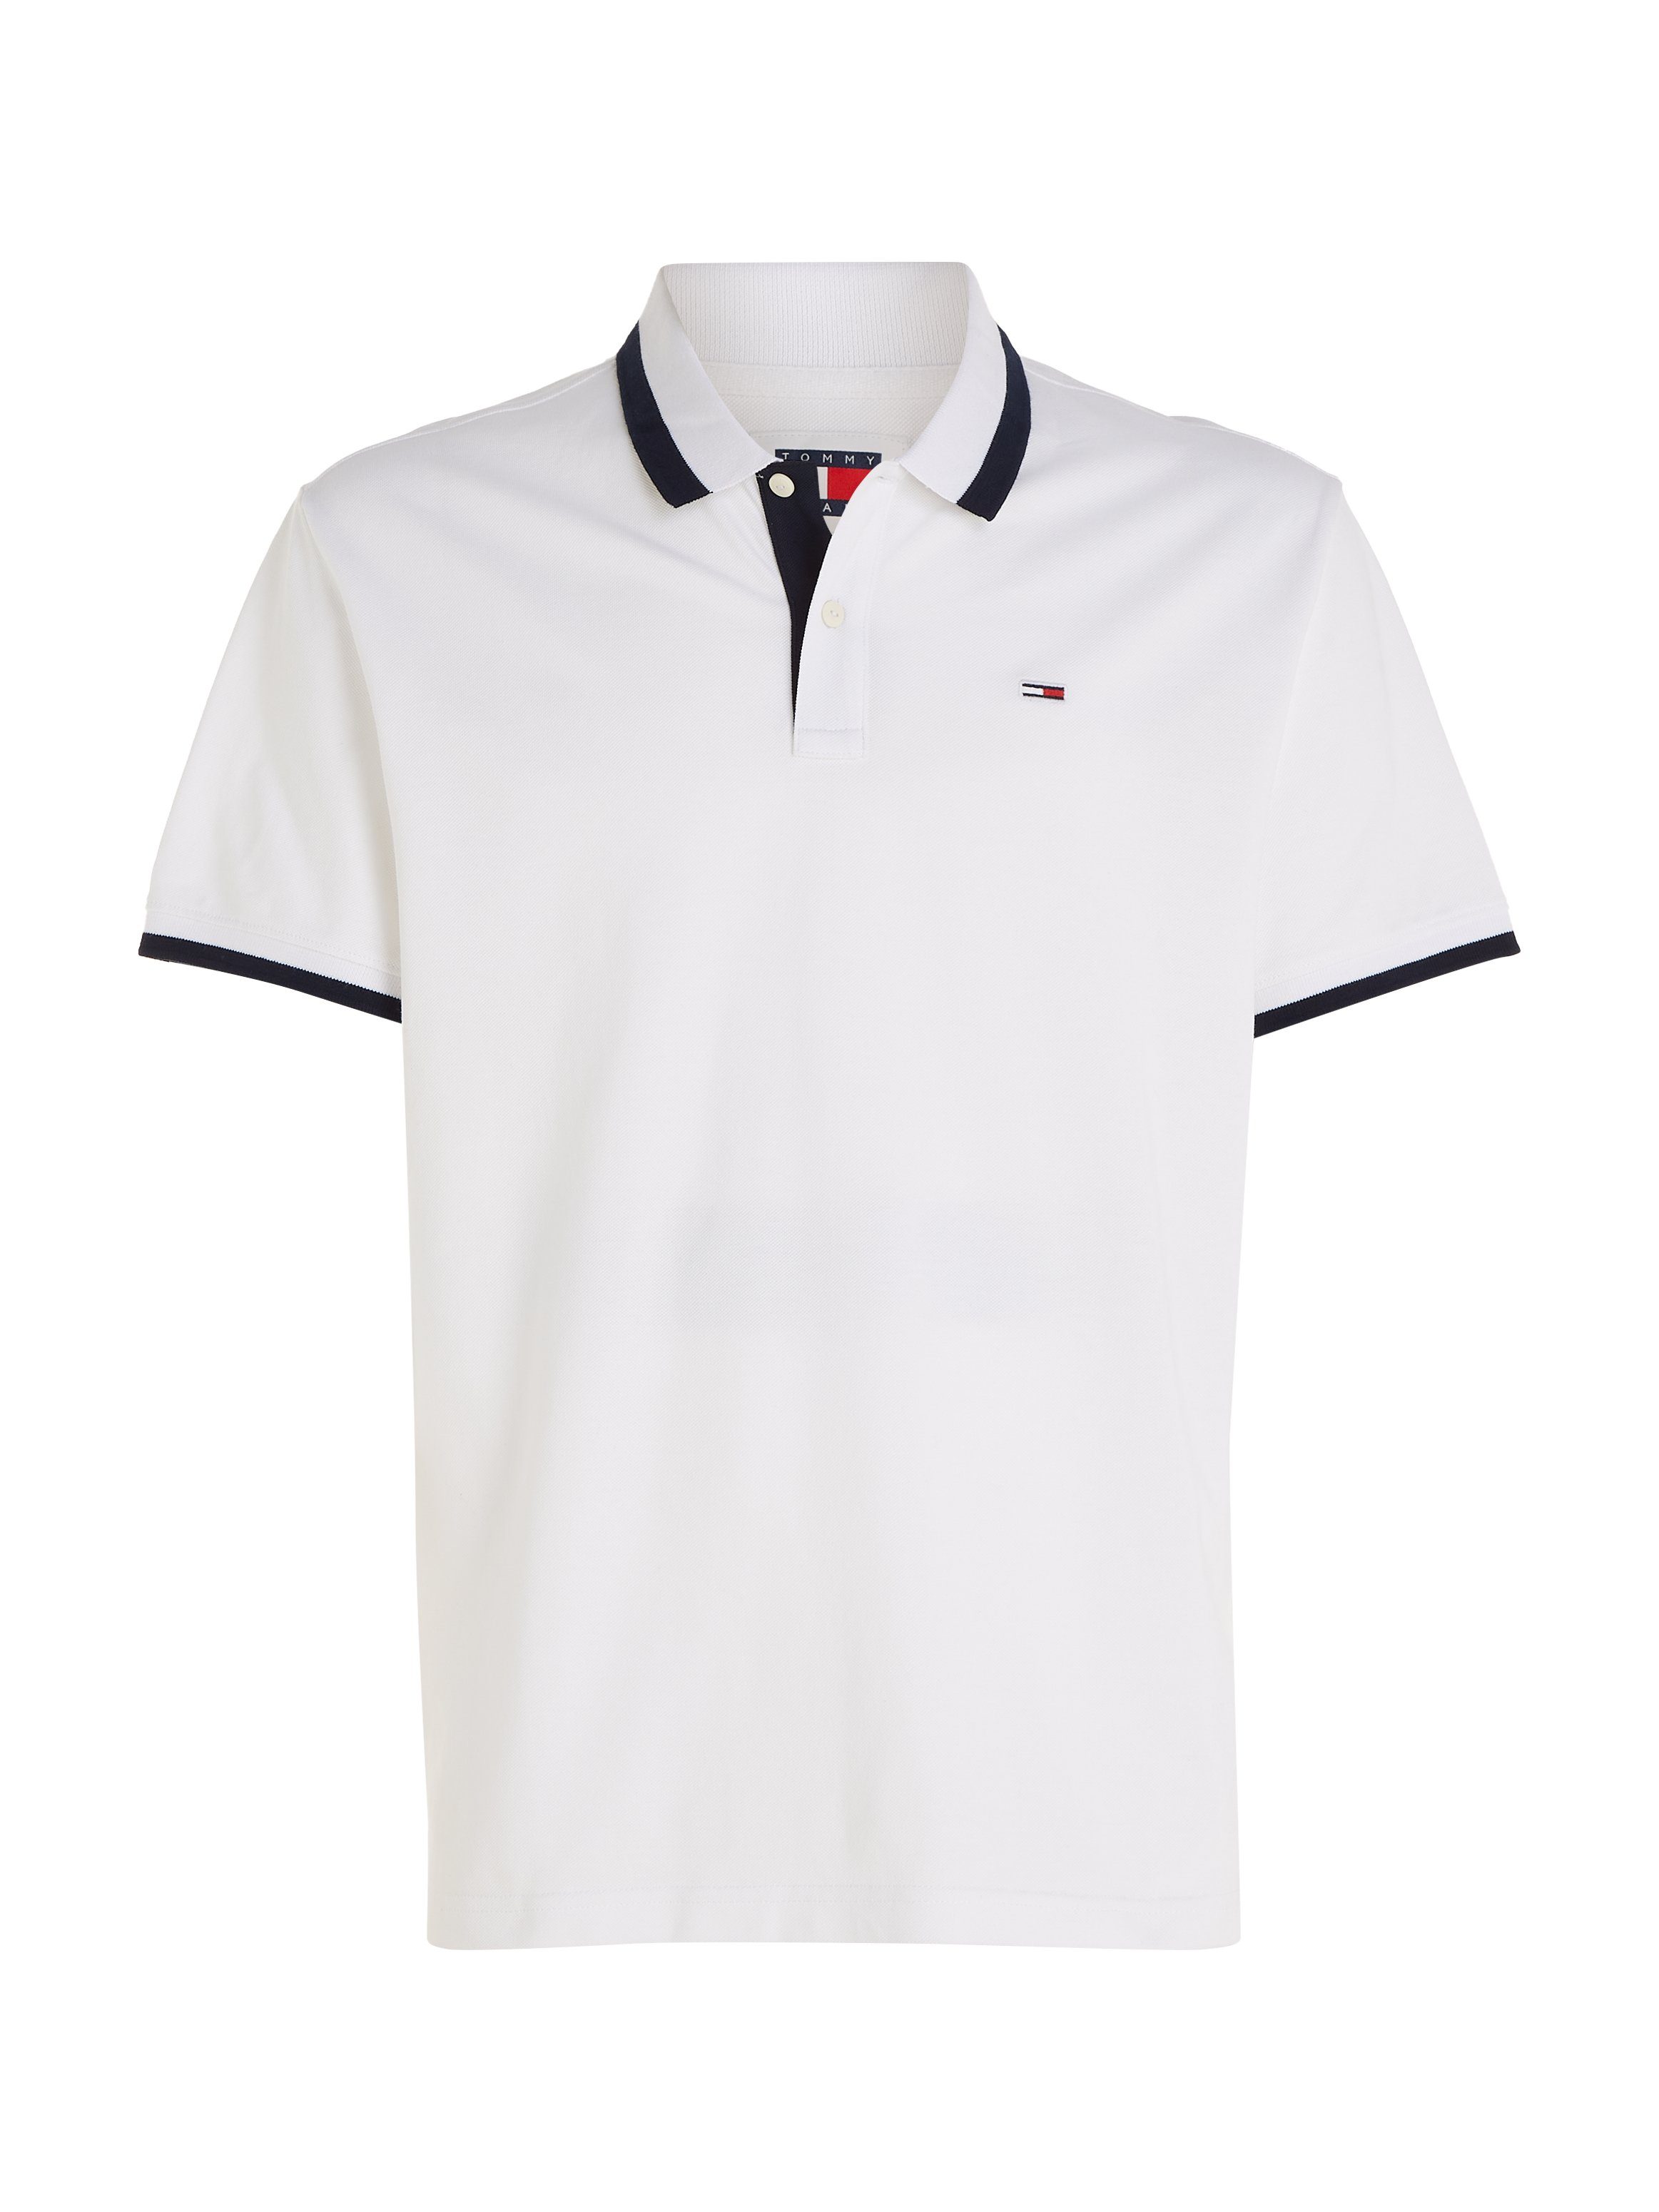 Jeans TIPPED SOLID mit Tommy POLO Polokragen White REG Poloshirt TJM